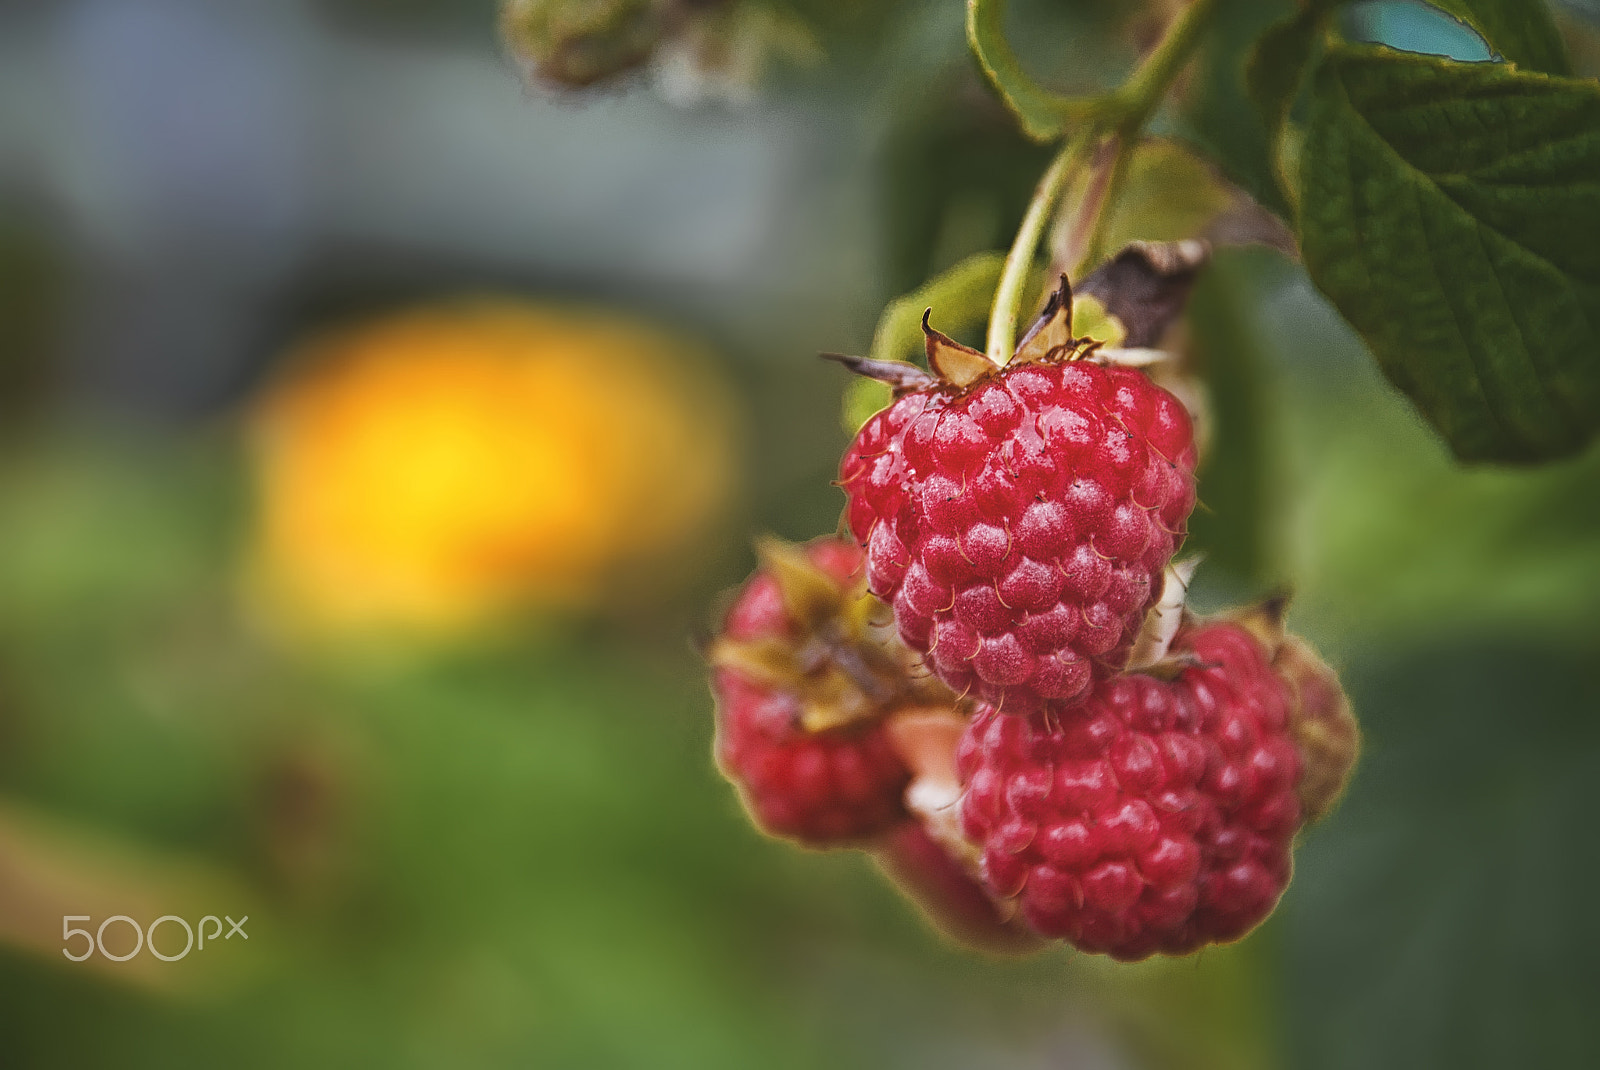 Nikon D700 sample photo. Summer ripe raspberries in the natural environment photography